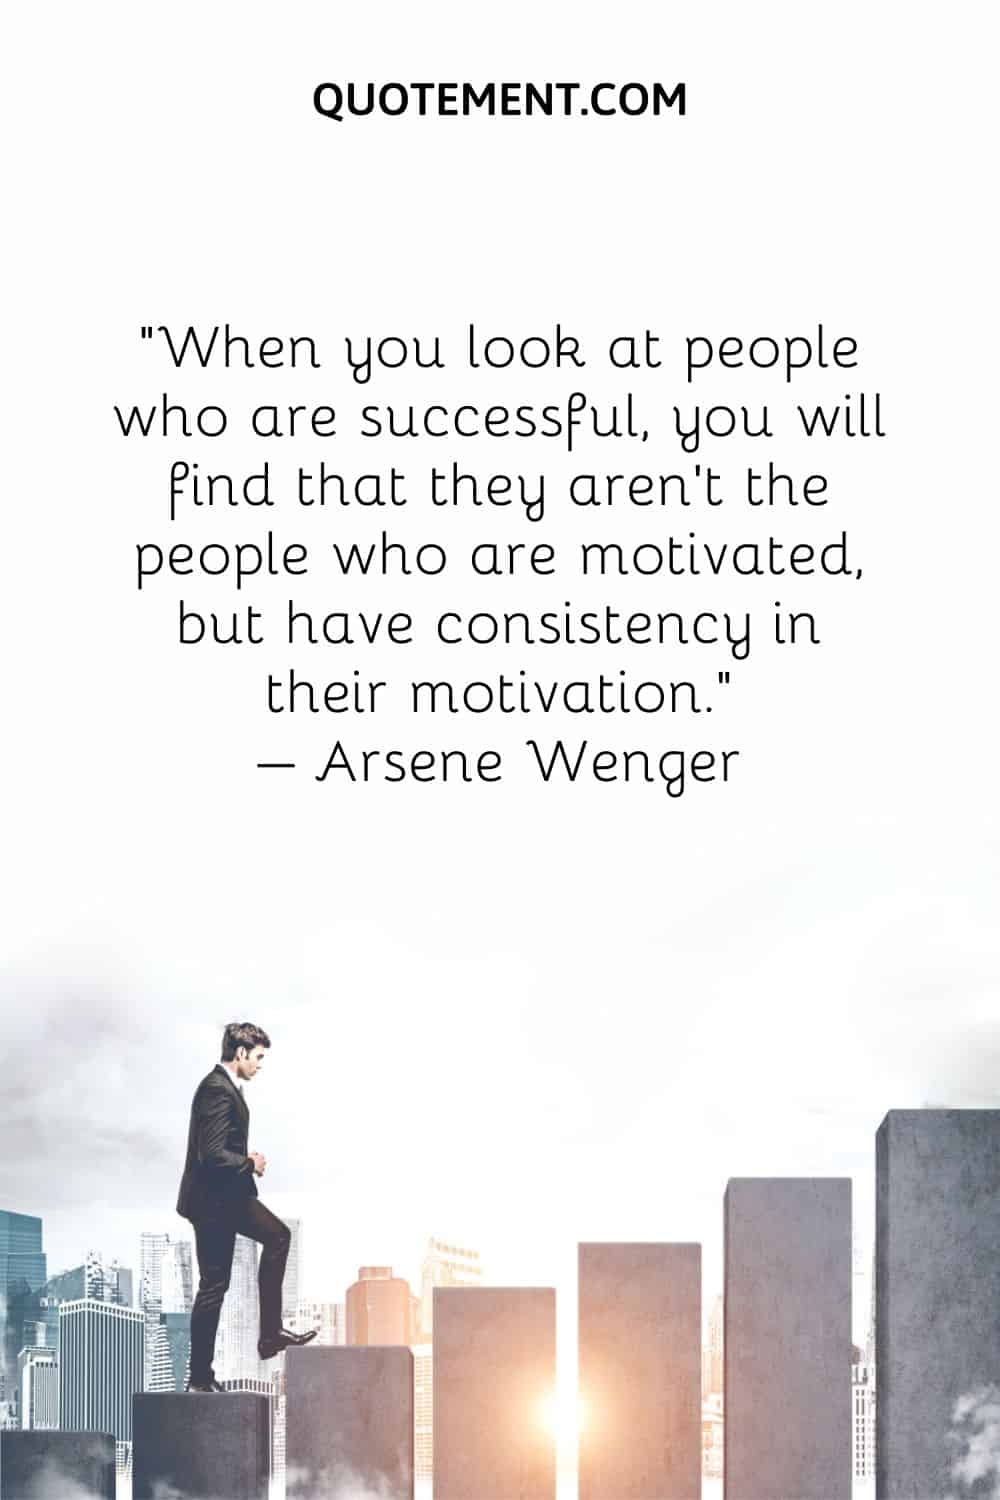 When you look at people who are successful, you will find that they aren't the people who are motivated, but have consistency in their motivation.